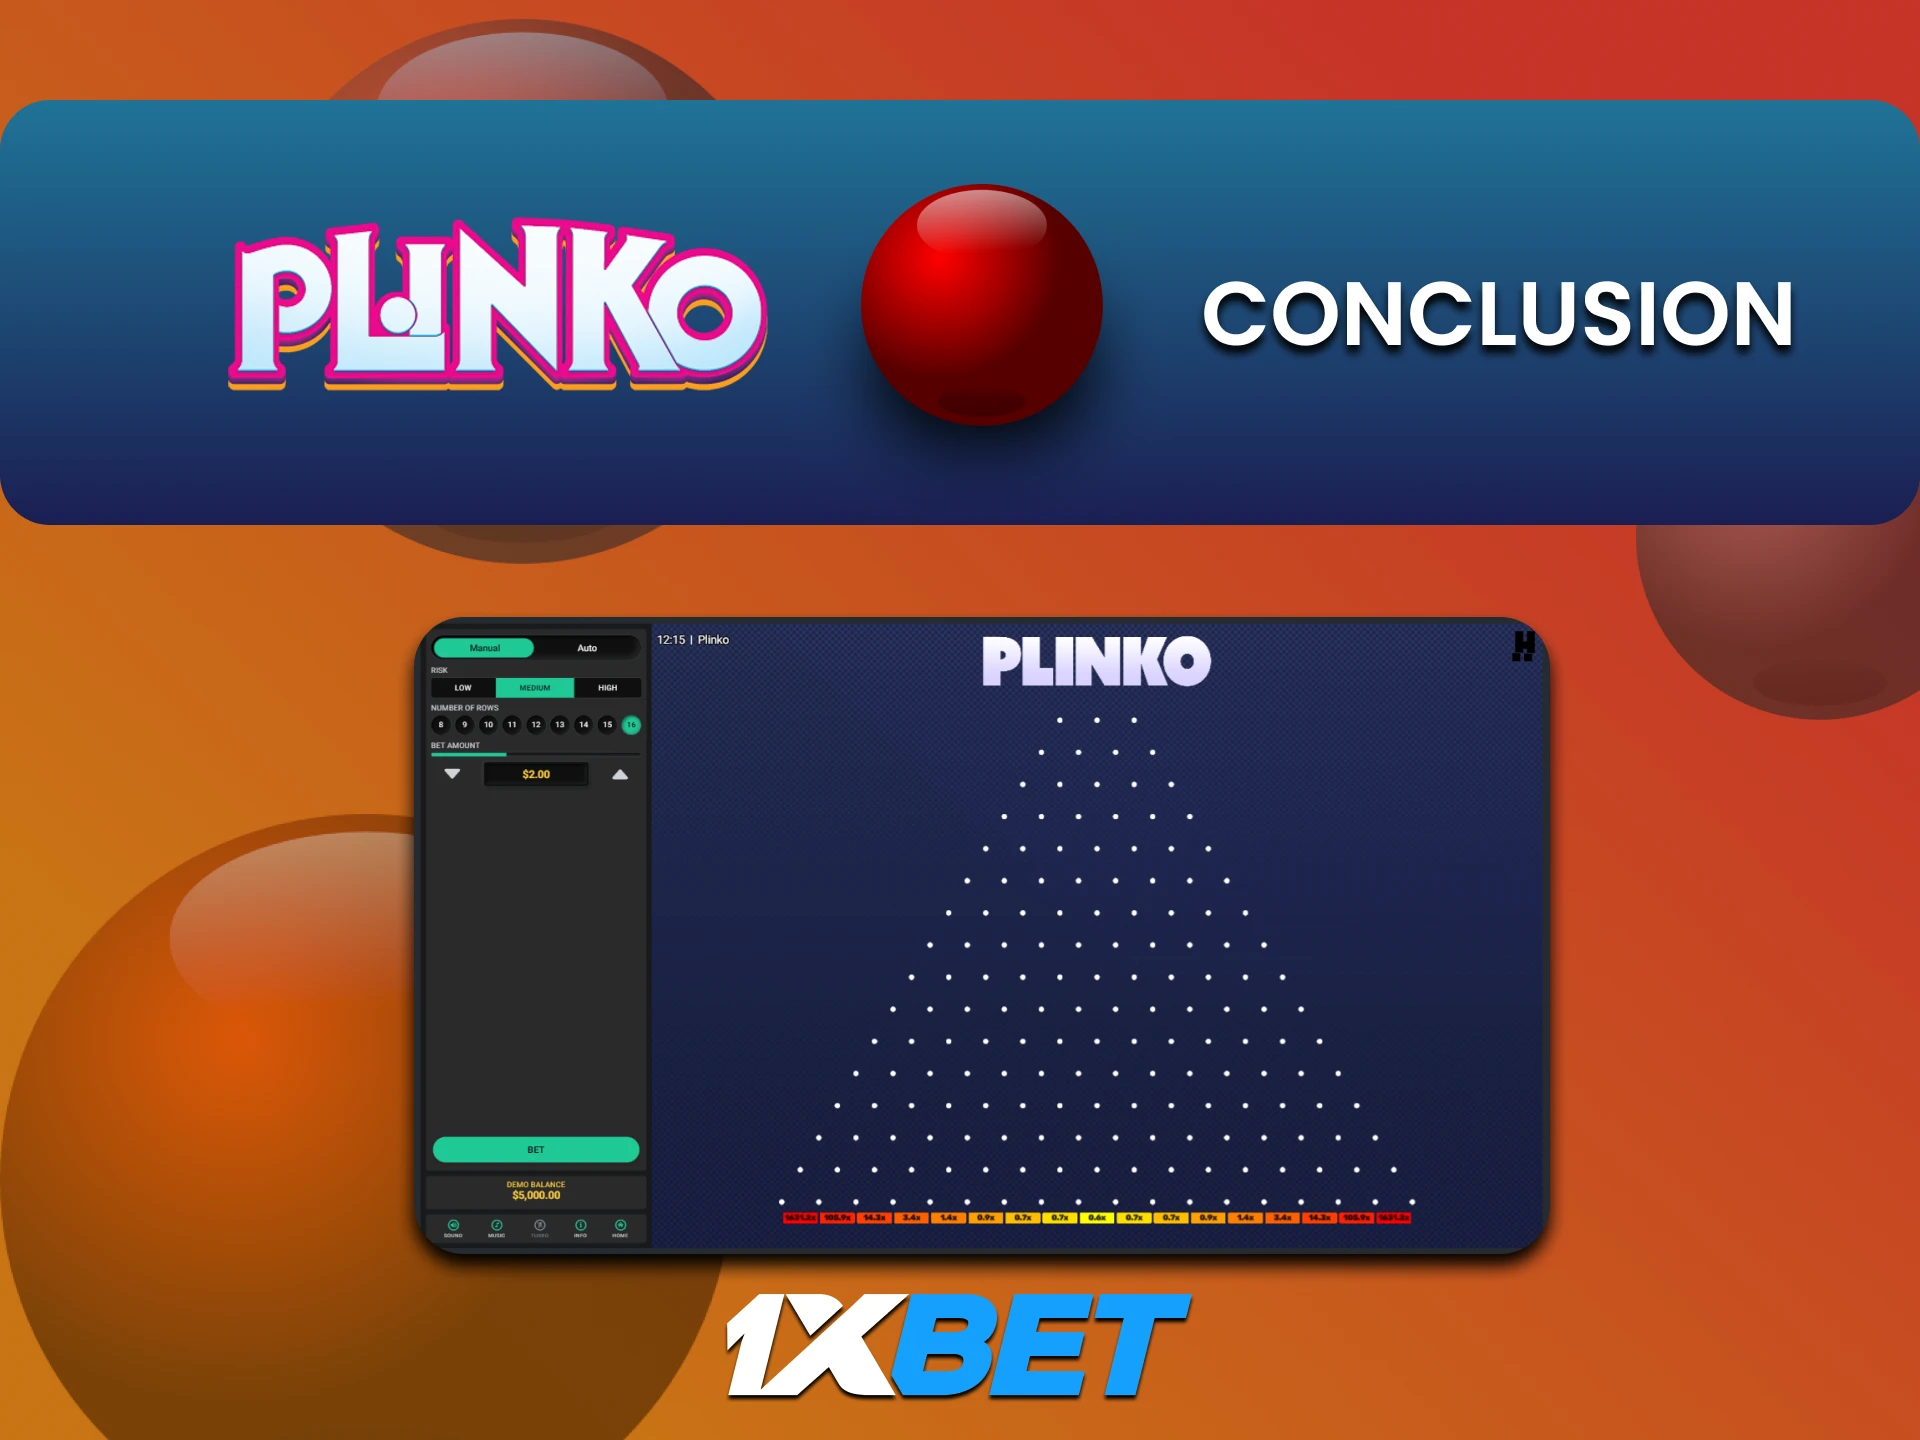 1xbet is ideal for playing Plinko.